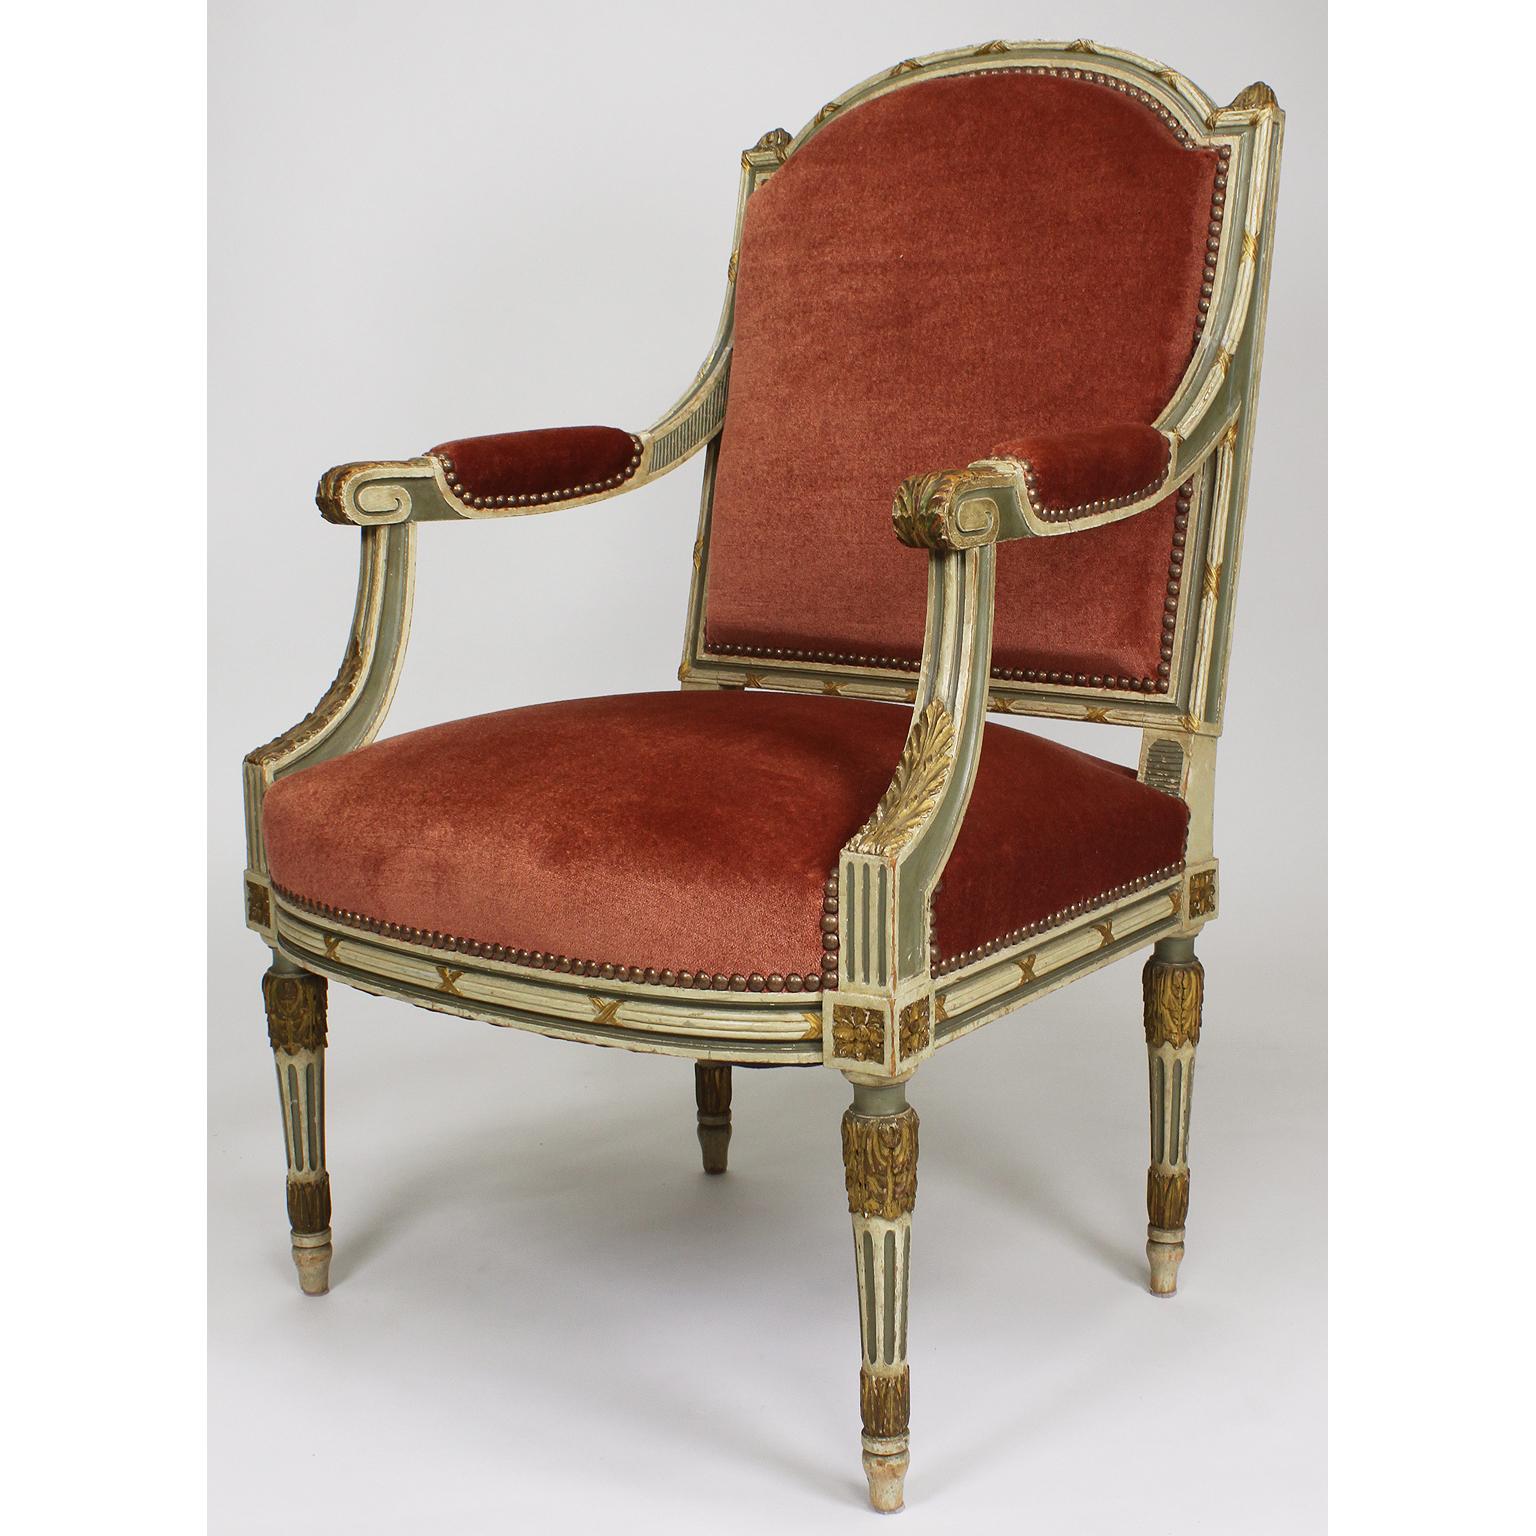 A fine pair of French 19th-20th century Louis XVI style two-tone cream and green painted with parcel-giltwood carved fauteuils armchairs. The intricately carved wood frames with a padded backrest, open scrolled and padded armrests, with